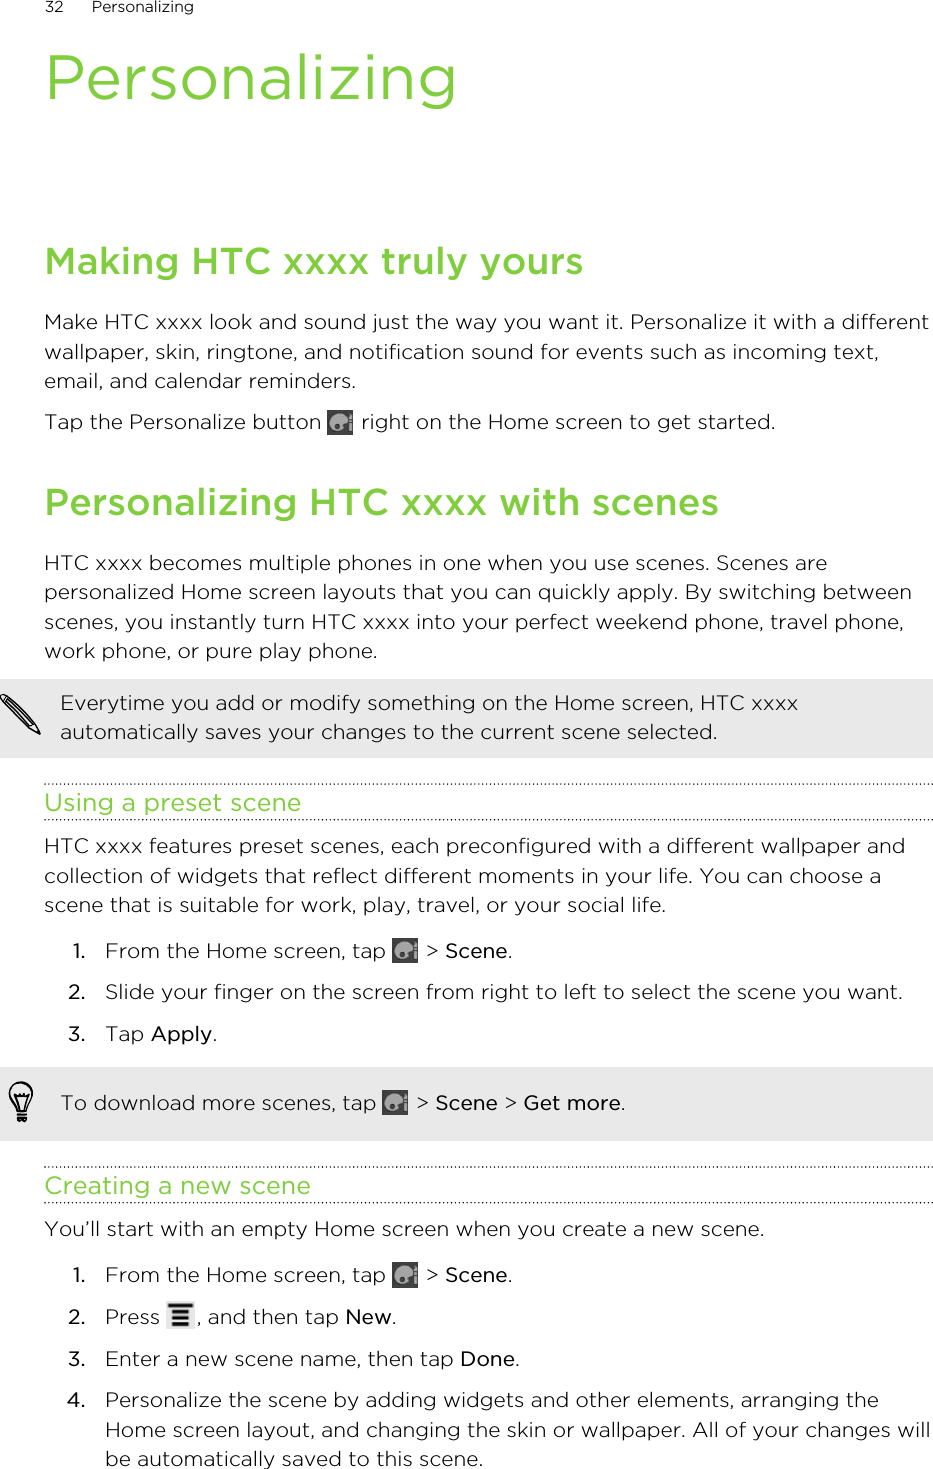 PersonalizingMaking HTC xxxx truly yoursMake HTC xxxx look and sound just the way you want it. Personalize it with a differentwallpaper, skin, ringtone, and notification sound for events such as incoming text,email, and calendar reminders.Tap the Personalize button   right on the Home screen to get started.Personalizing HTC xxxx with scenesHTC xxxx becomes multiple phones in one when you use scenes. Scenes arepersonalized Home screen layouts that you can quickly apply. By switching betweenscenes, you instantly turn HTC xxxx into your perfect weekend phone, travel phone,work phone, or pure play phone.Everytime you add or modify something on the Home screen, HTC xxxxautomatically saves your changes to the current scene selected.Using a preset sceneHTC xxxx features preset scenes, each preconfigured with a different wallpaper andcollection of widgets that reflect different moments in your life. You can choose ascene that is suitable for work, play, travel, or your social life.1. From the Home screen, tap   &gt; Scene.2. Slide your finger on the screen from right to left to select the scene you want.3. Tap Apply.To download more scenes, tap   &gt; Scene &gt; Get more.Creating a new sceneYou’ll start with an empty Home screen when you create a new scene.1. From the Home screen, tap   &gt; Scene.2. Press  , and then tap New.3. Enter a new scene name, then tap Done.4. Personalize the scene by adding widgets and other elements, arranging theHome screen layout, and changing the skin or wallpaper. All of your changes willbe automatically saved to this scene.32 Personalizing